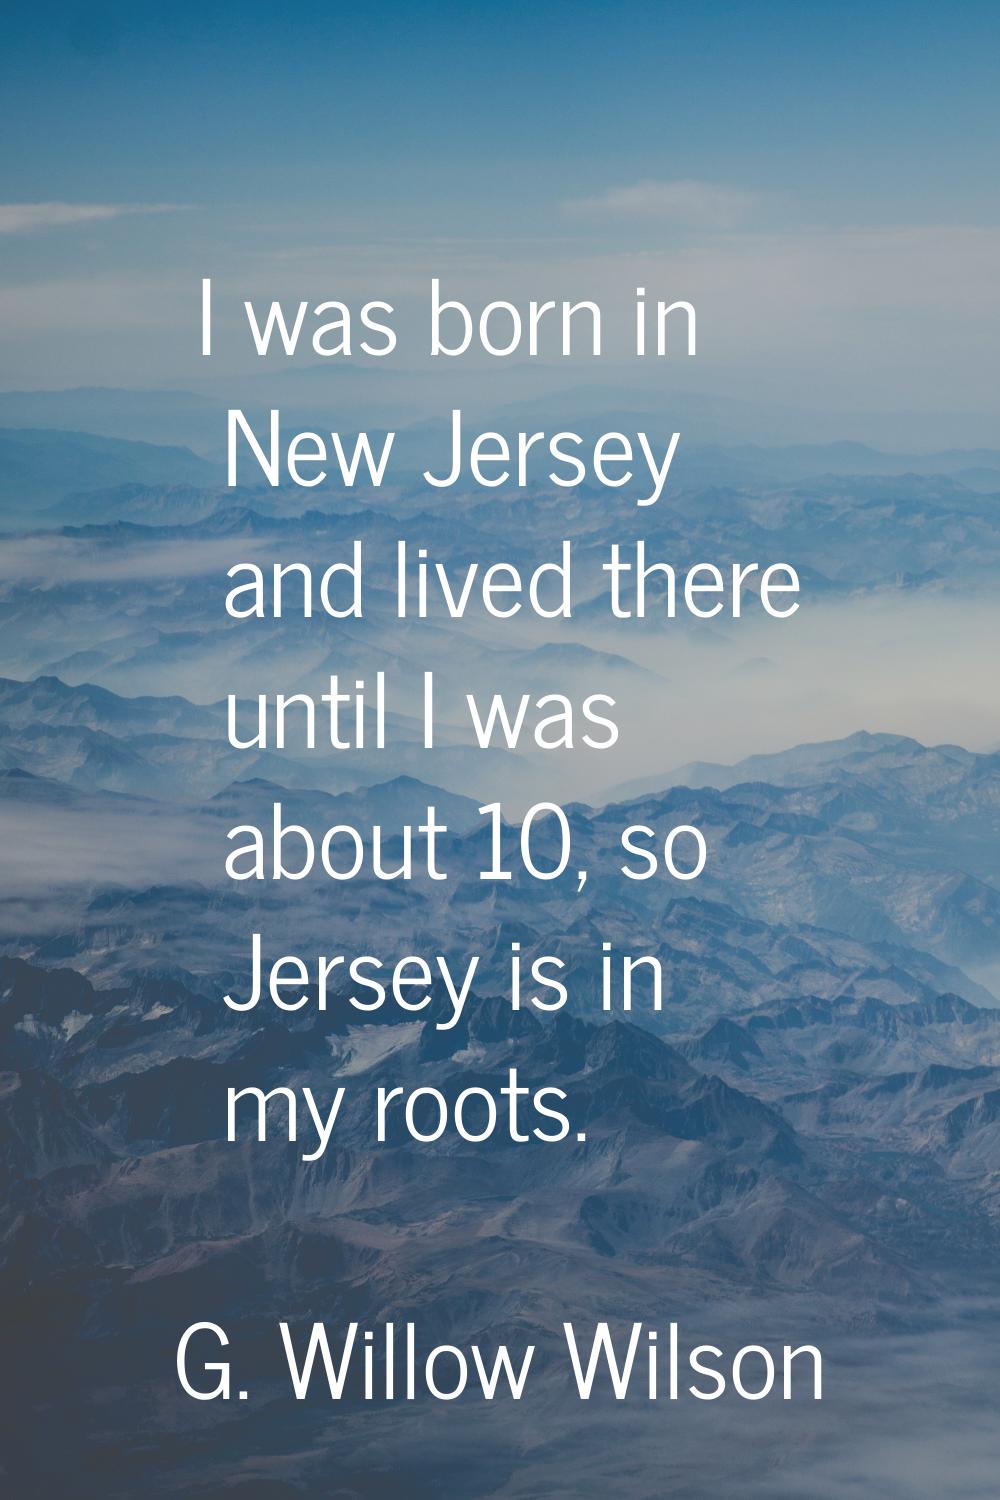 I was born in New Jersey and lived there until I was about 10, so Jersey is in my roots.